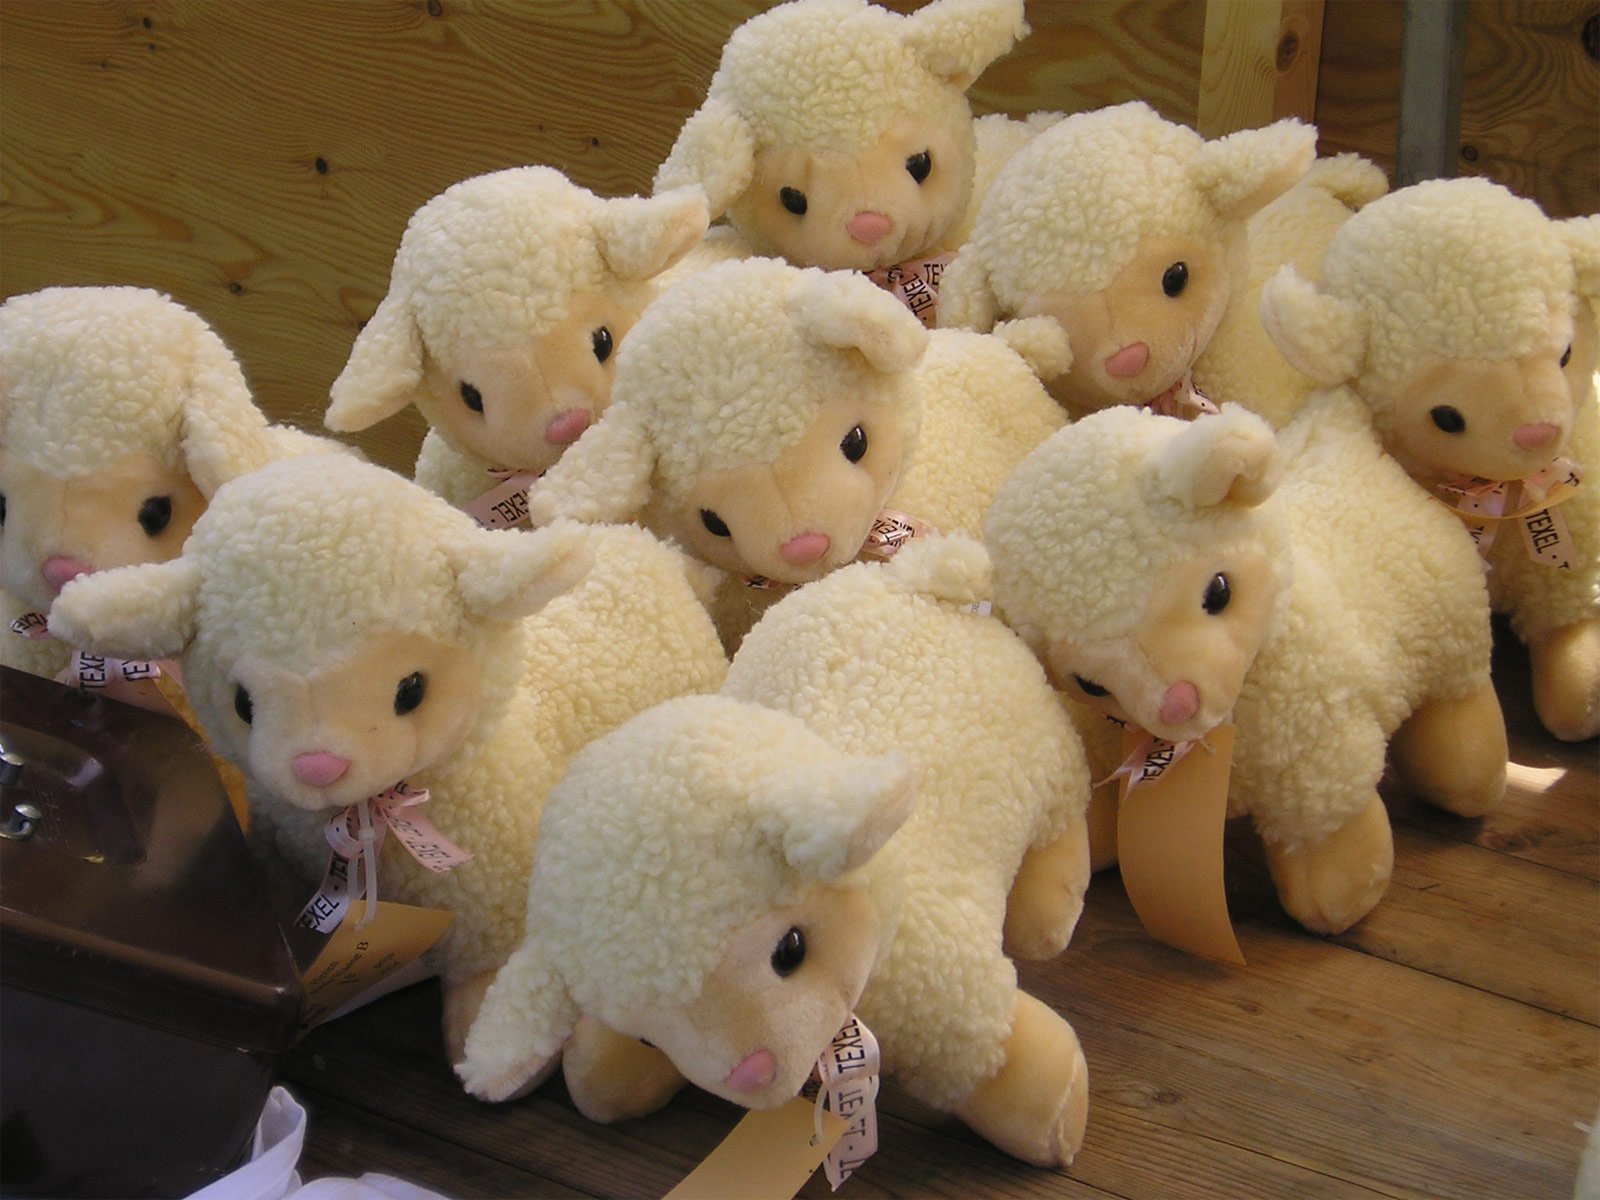 a bunch of stuffed animals sitting together in front of some wood